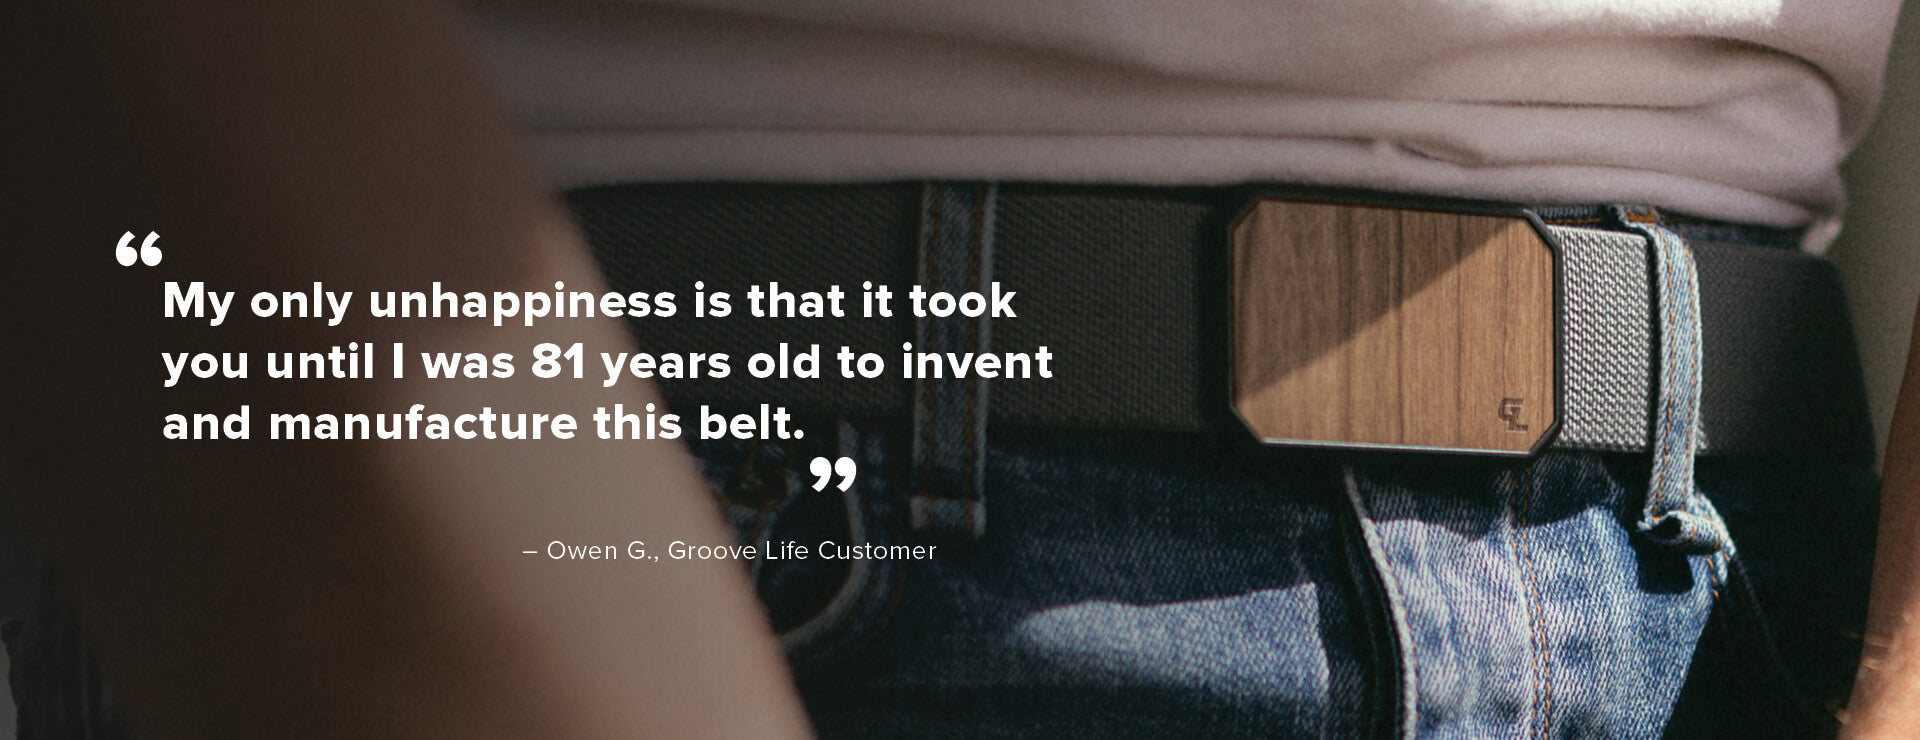 My only unhappiness is that it took you until I was 81 years old to invent and manufacture this belt - Owen G, Groove Life Customer